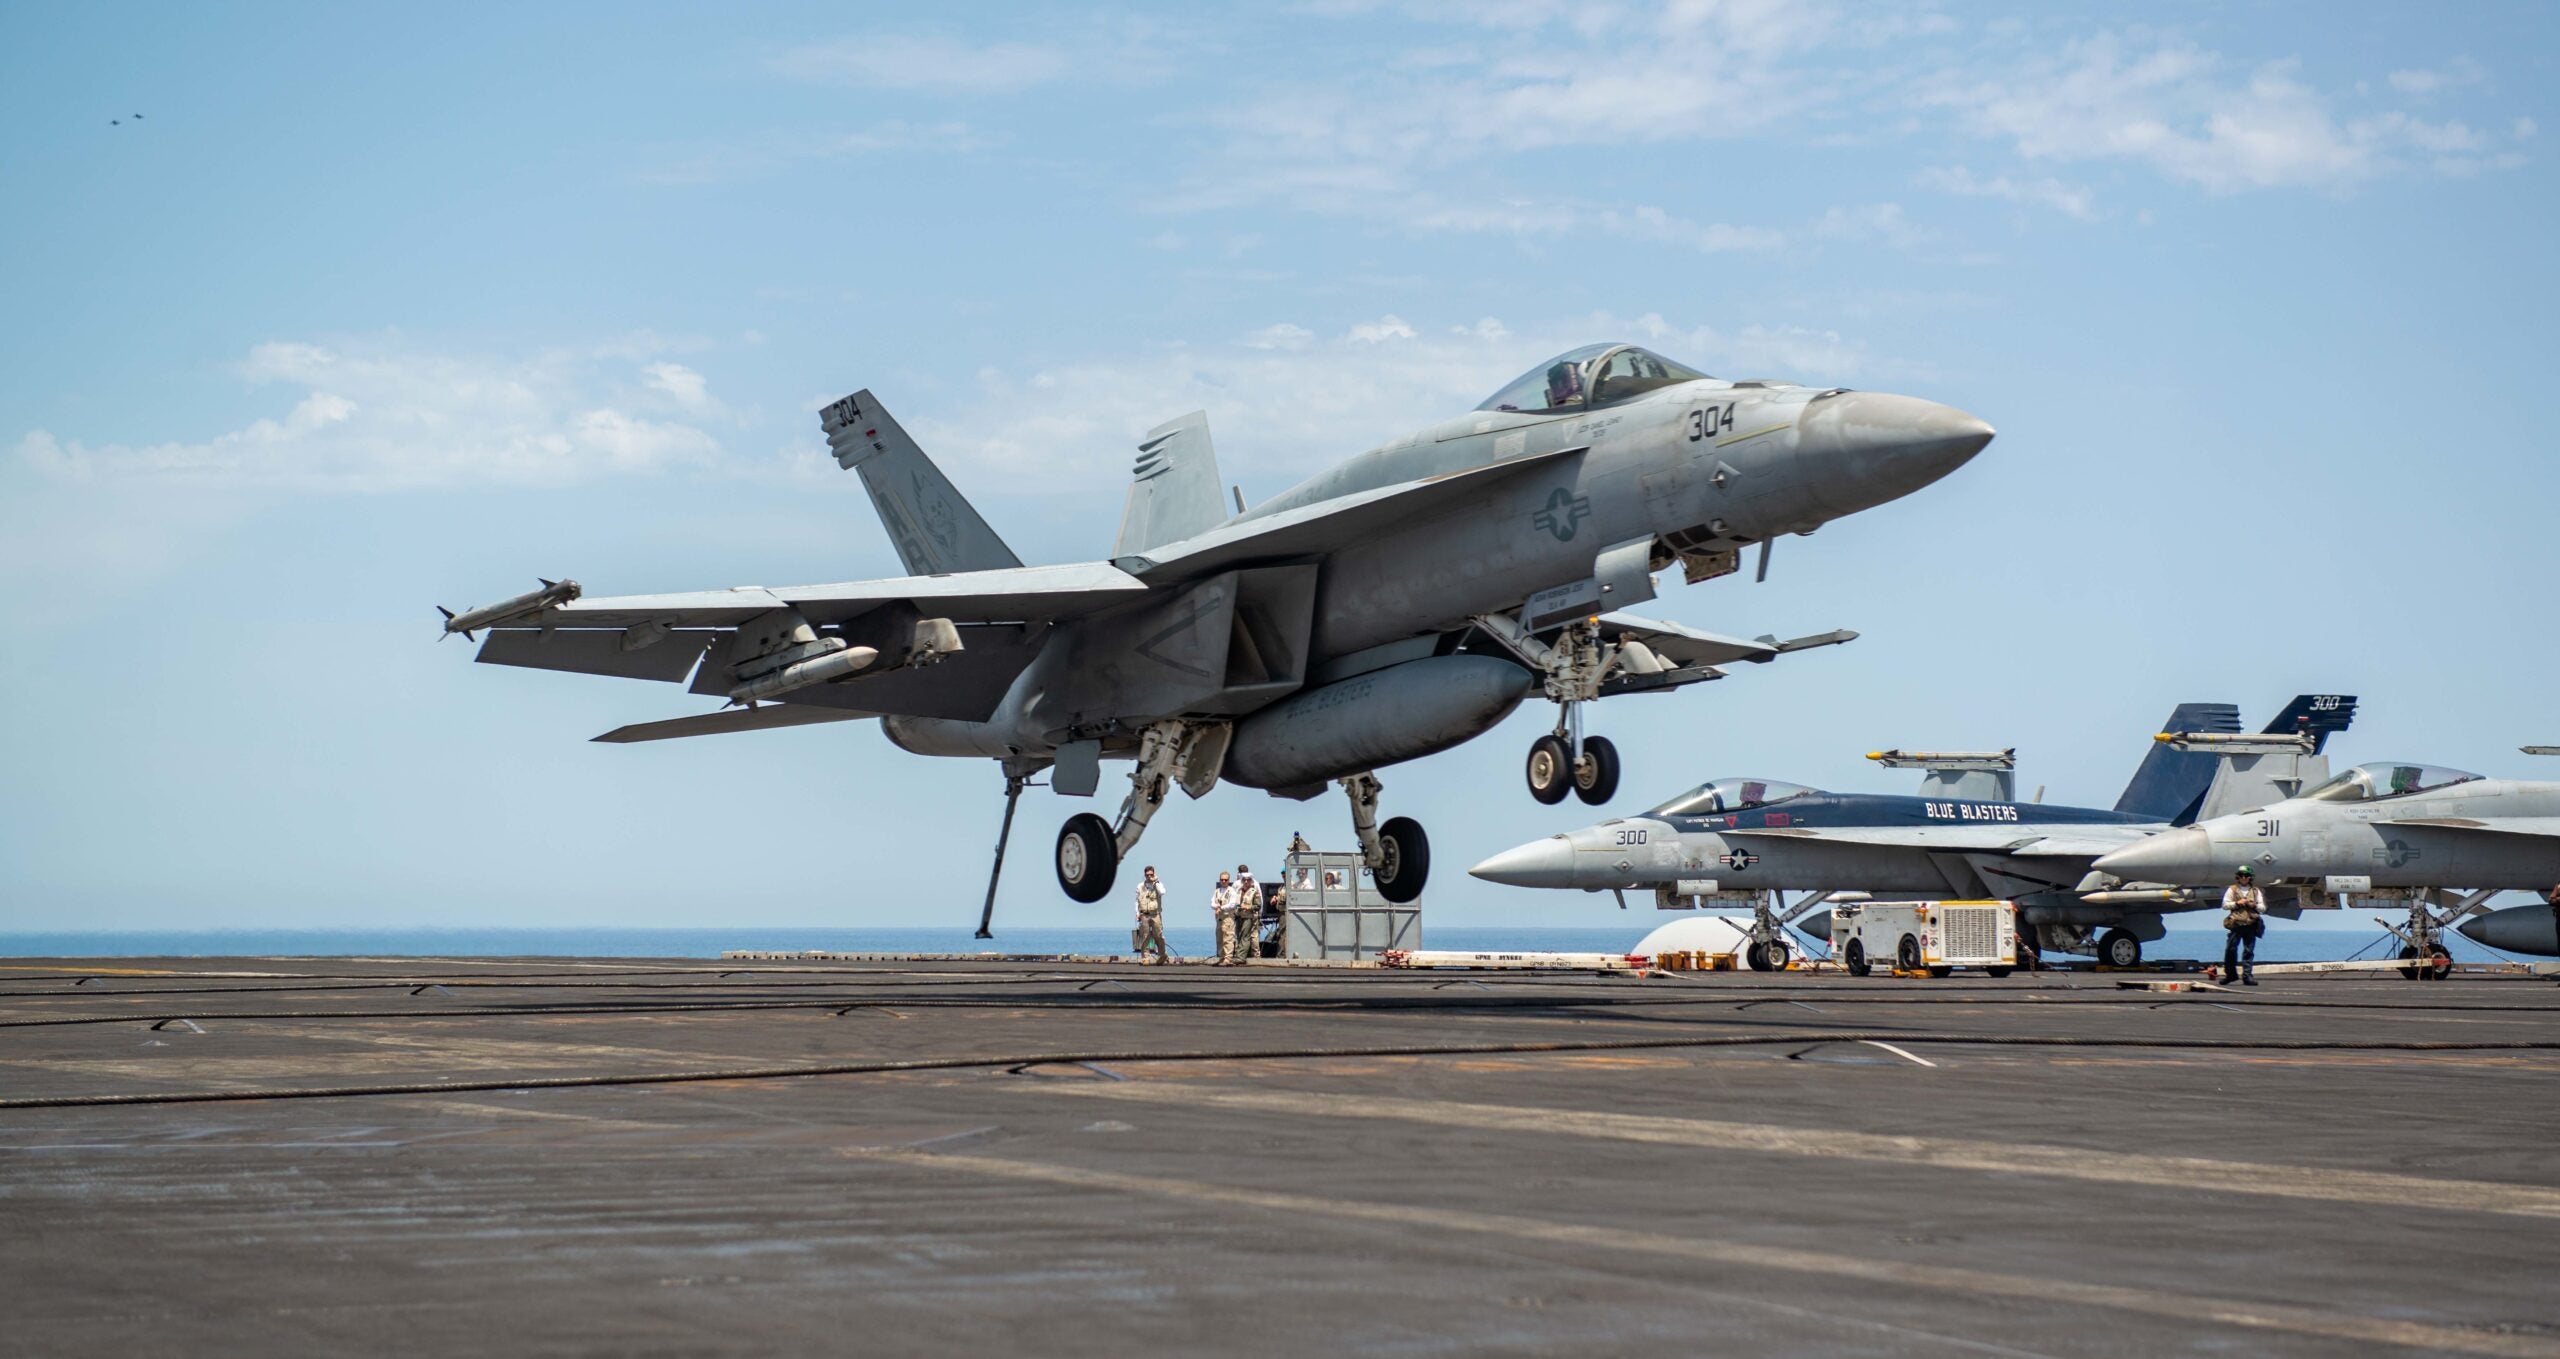 220615-N-ZE328-1227 MEDITERRANEAN SEA (June 15, 2022) An F/A-18E Super Hornet, attached to the “Blue Blasters” of Strike Fighter Squadron (VFA) 34, lands on the flight deck of USS Harry S. Truman (CVN 75), June 15, 2022. The Harry S. Truman Carrier Strike Group is on a scheduled deployment in the U.S. Naval Forces Europe area of operations, employed by U.S. Sixth Fleet to defend U.S., allied and partner interests. (U.S. Navy photo by Mass Communication Specialist 2nd Class Kelsey Trinh)